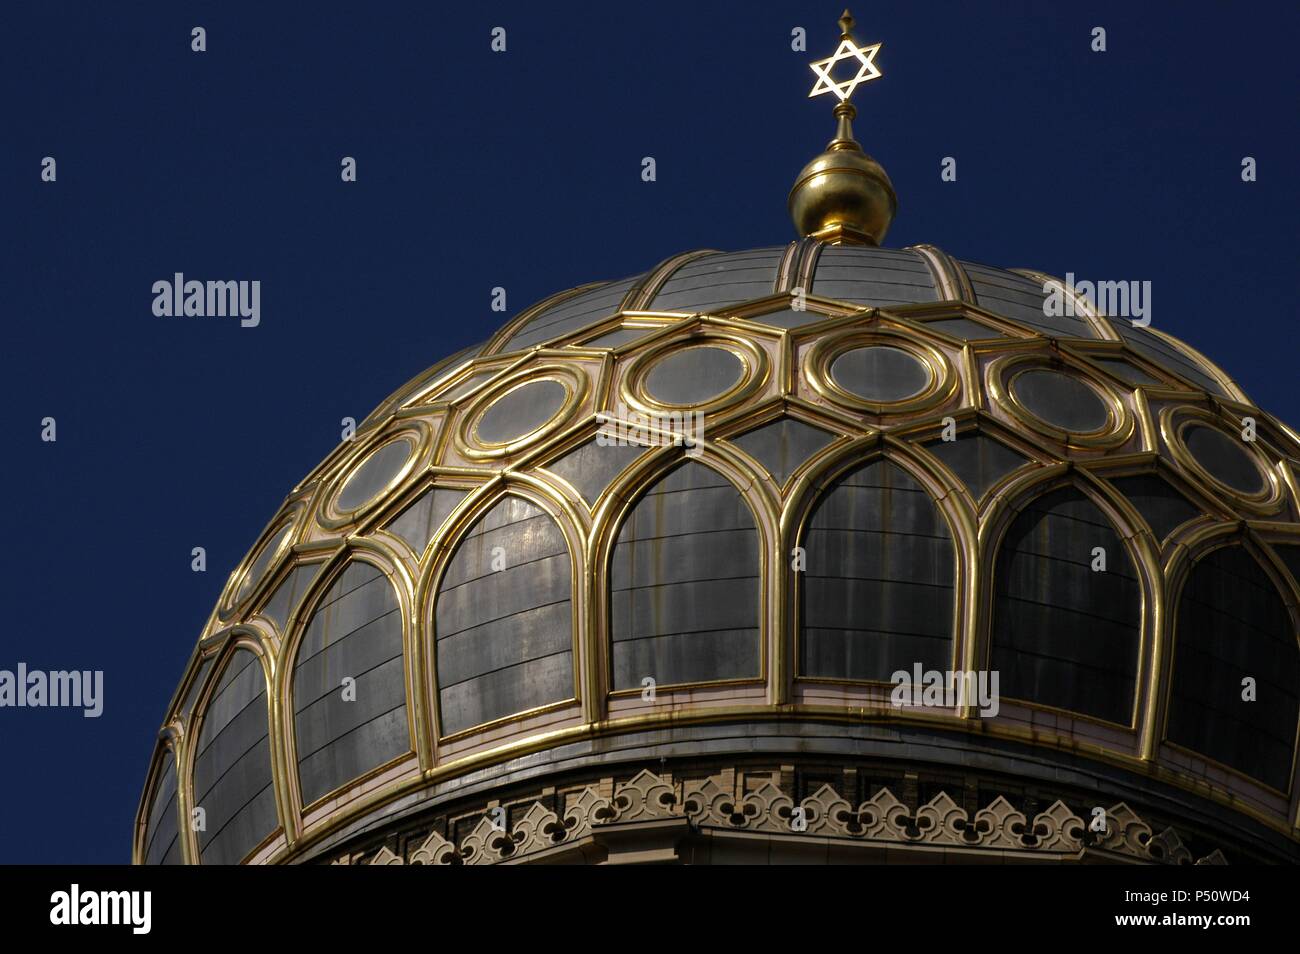 Germany. Berlin. New Synagogue (Neue Synagoge). Built in 1859-66 by German architects Eduard Knoblauch (1801-1865) and, after his death by Friedrich August Stuler (1800-1865). It was destroyed by the Nazis during the World War II and reconstructed between 1988-1991 by Bernhard Leisering(1951-2012). Detail. Dome with gilded ribs and crowned byt the Star of David. Stock Photo